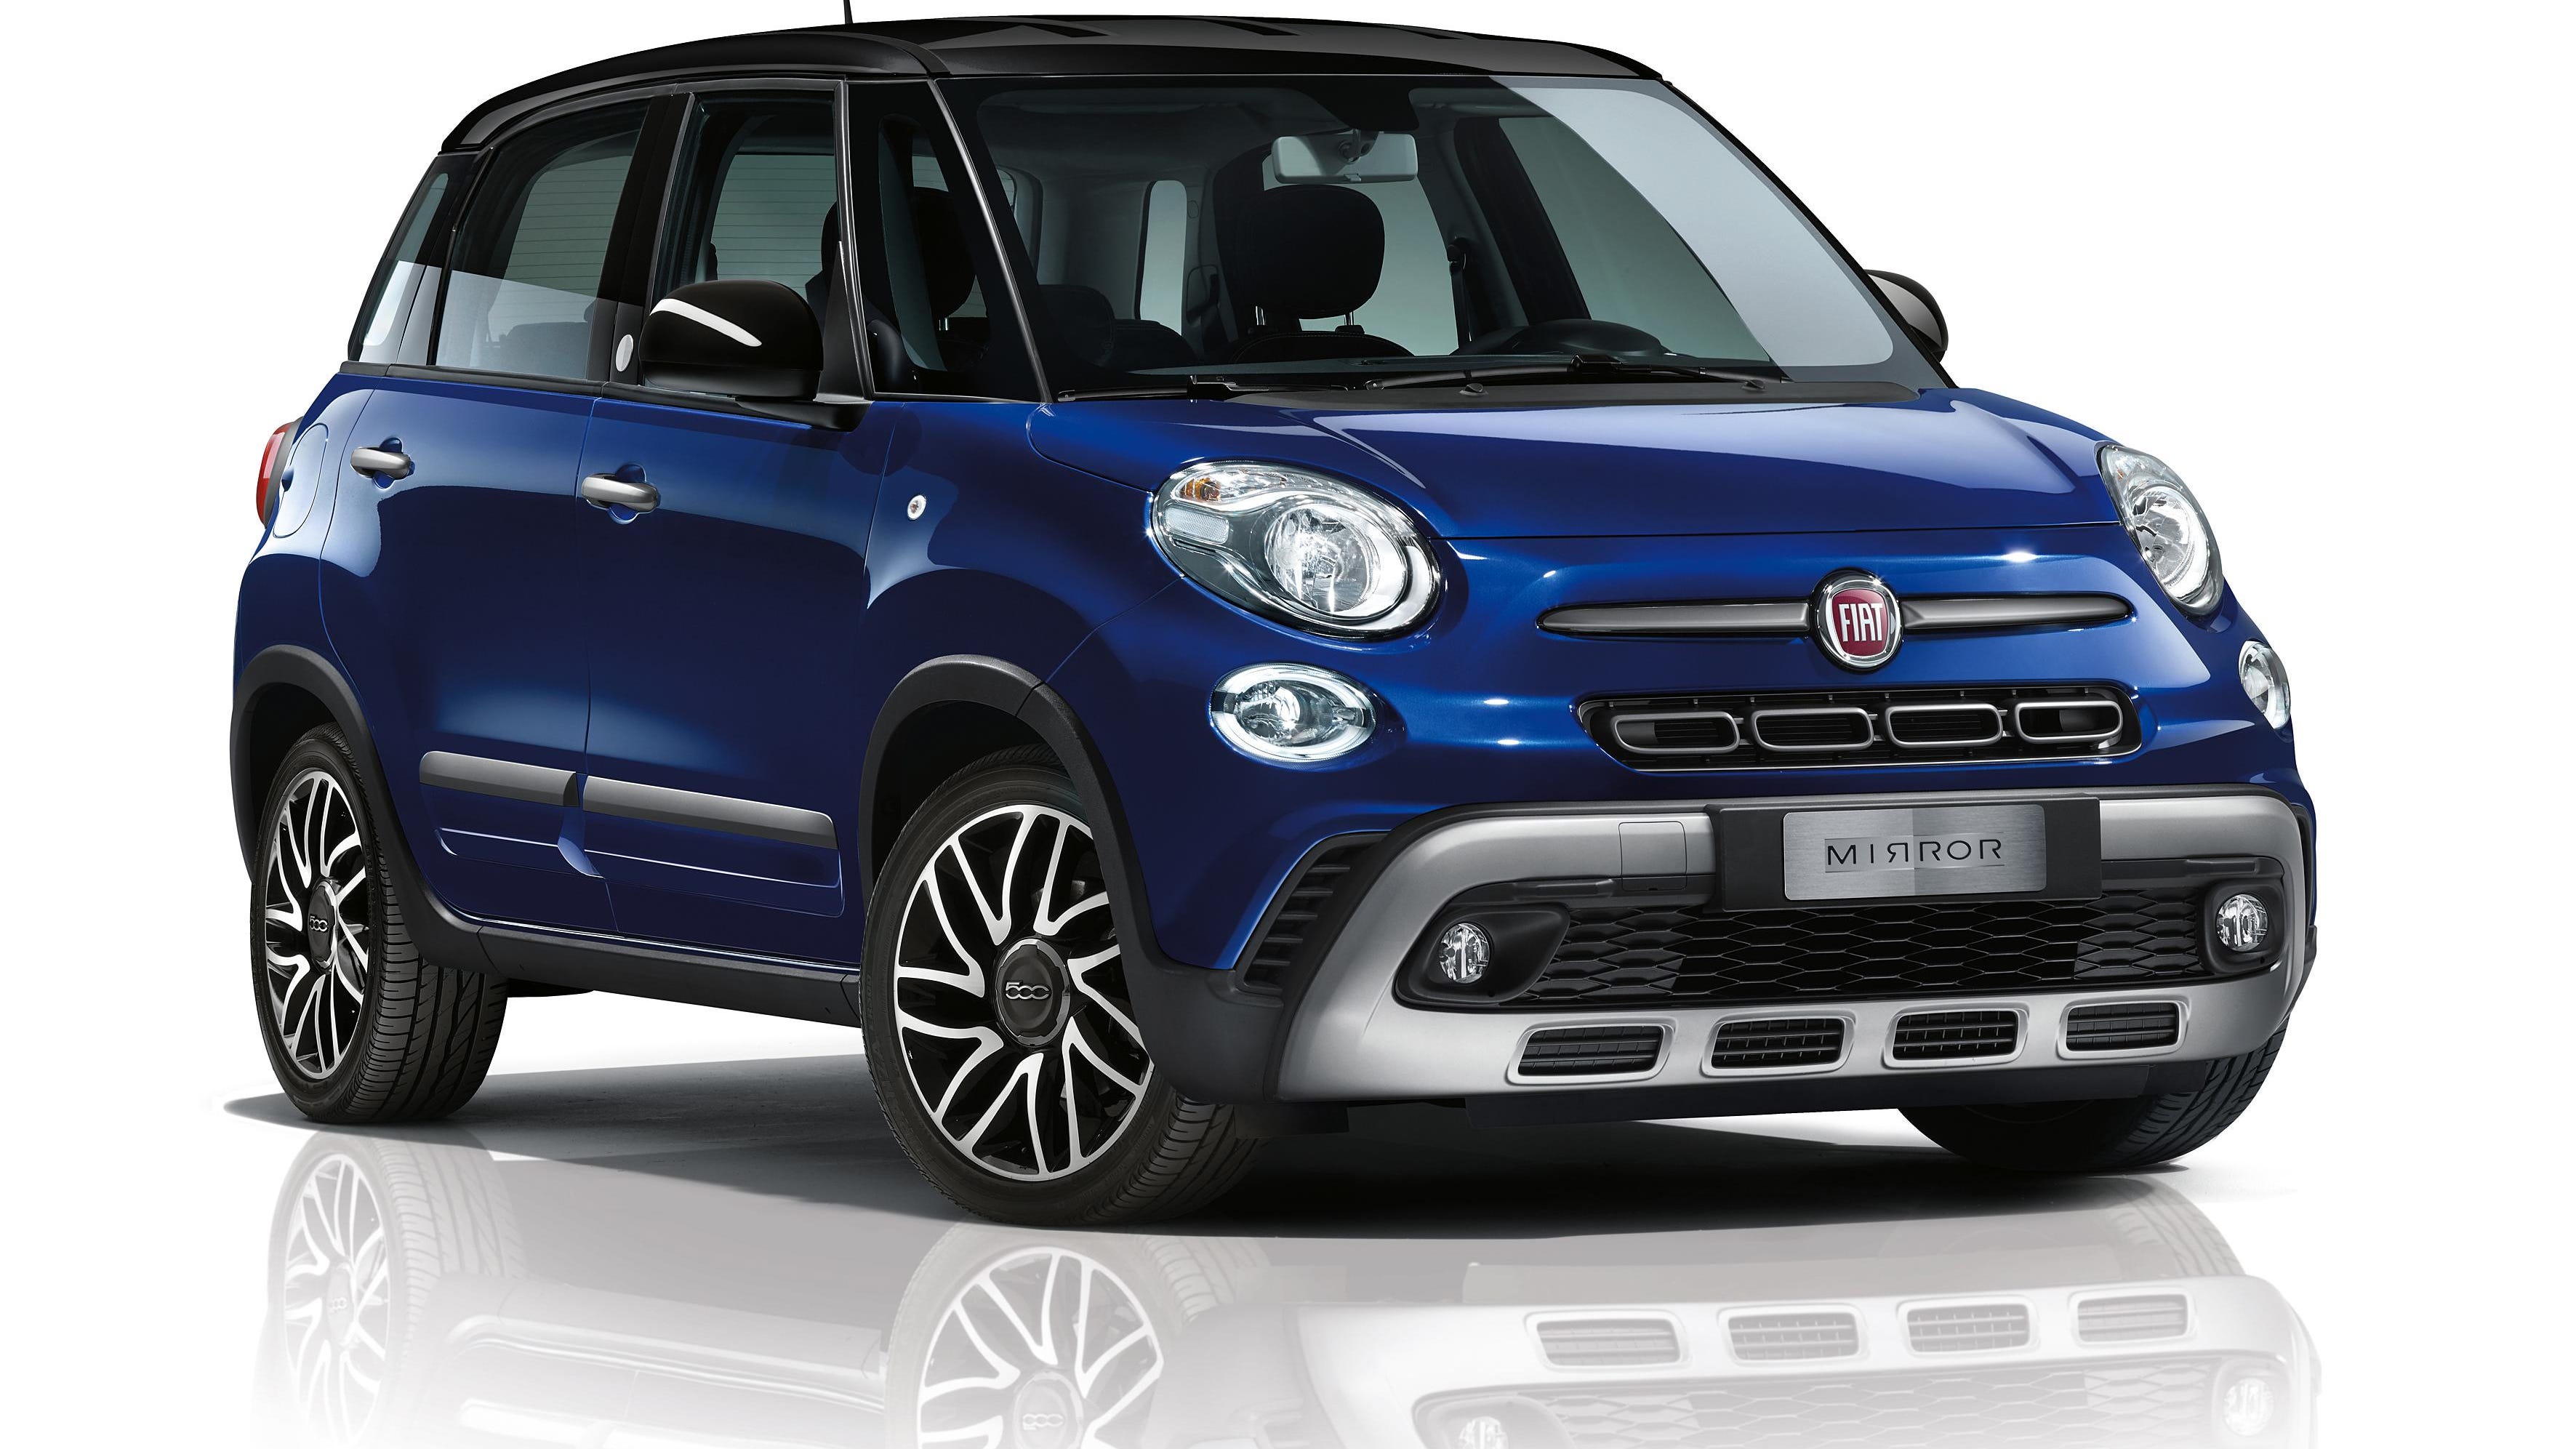 Overpriced and Underperforming: Why the 2019 Fiat 500L Up Small